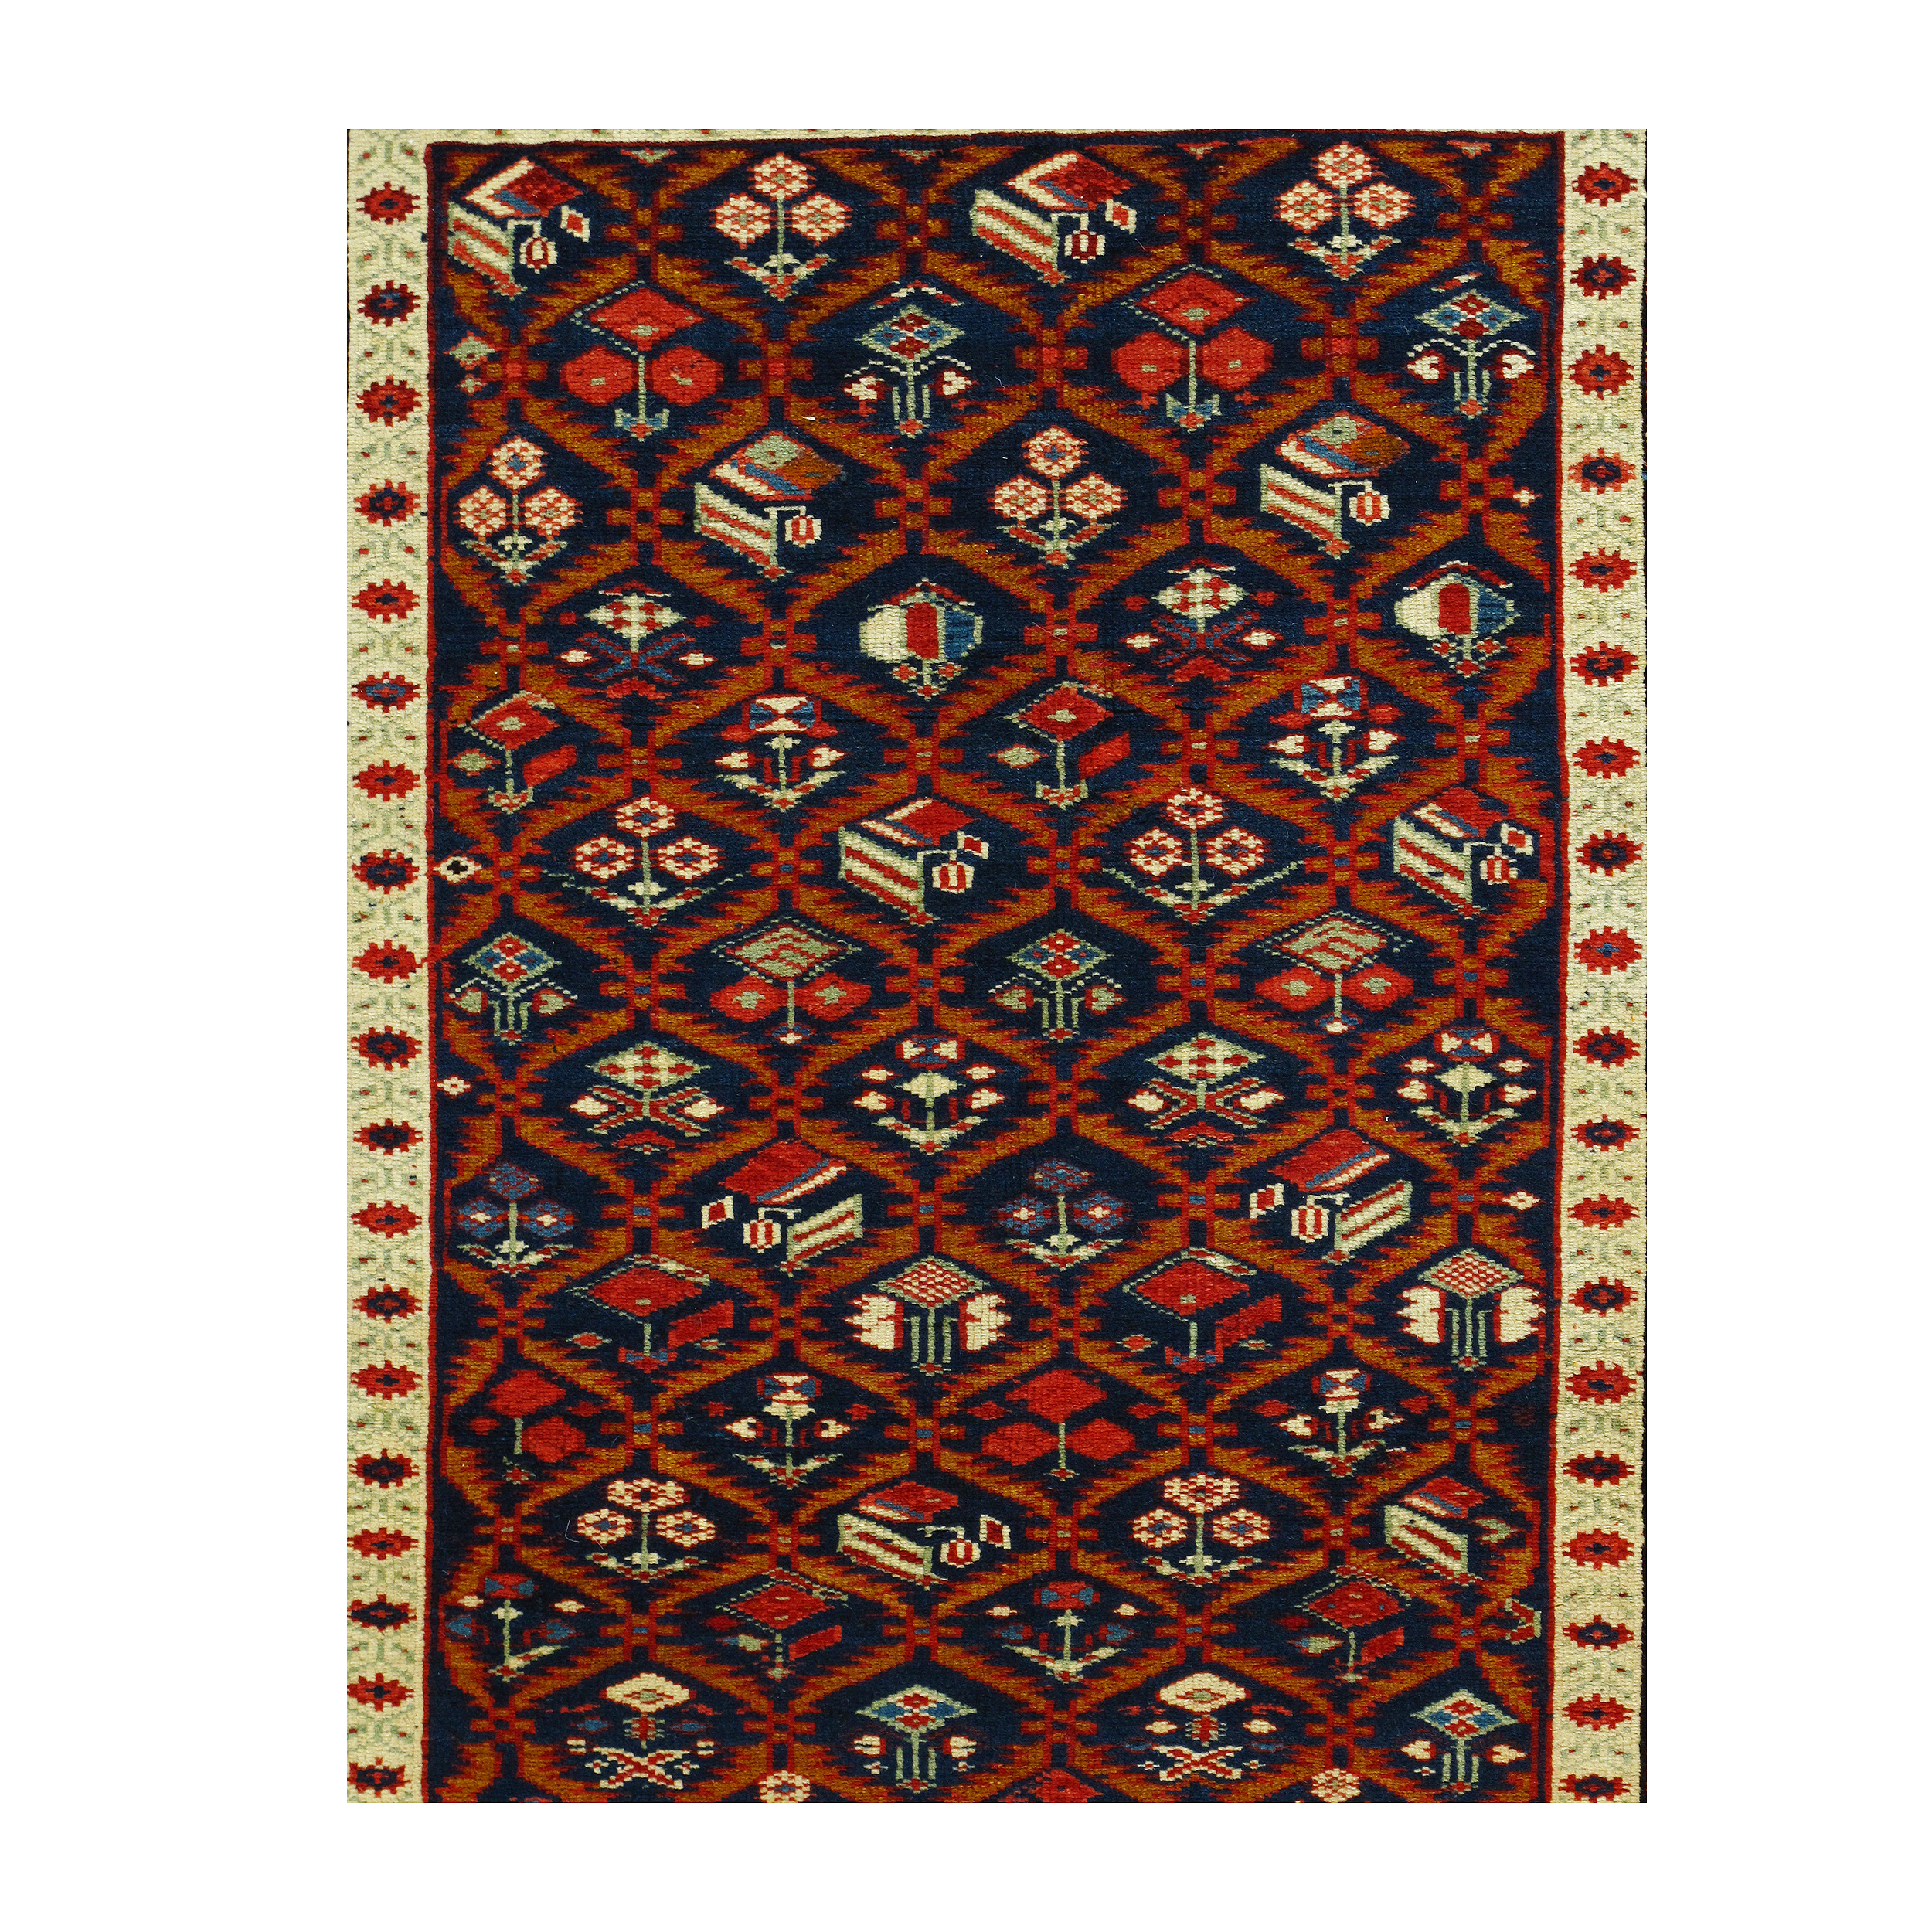 Caucasian Rug is a authentic antique tribal rug from Azerbaijan, featuring geometric patterns.